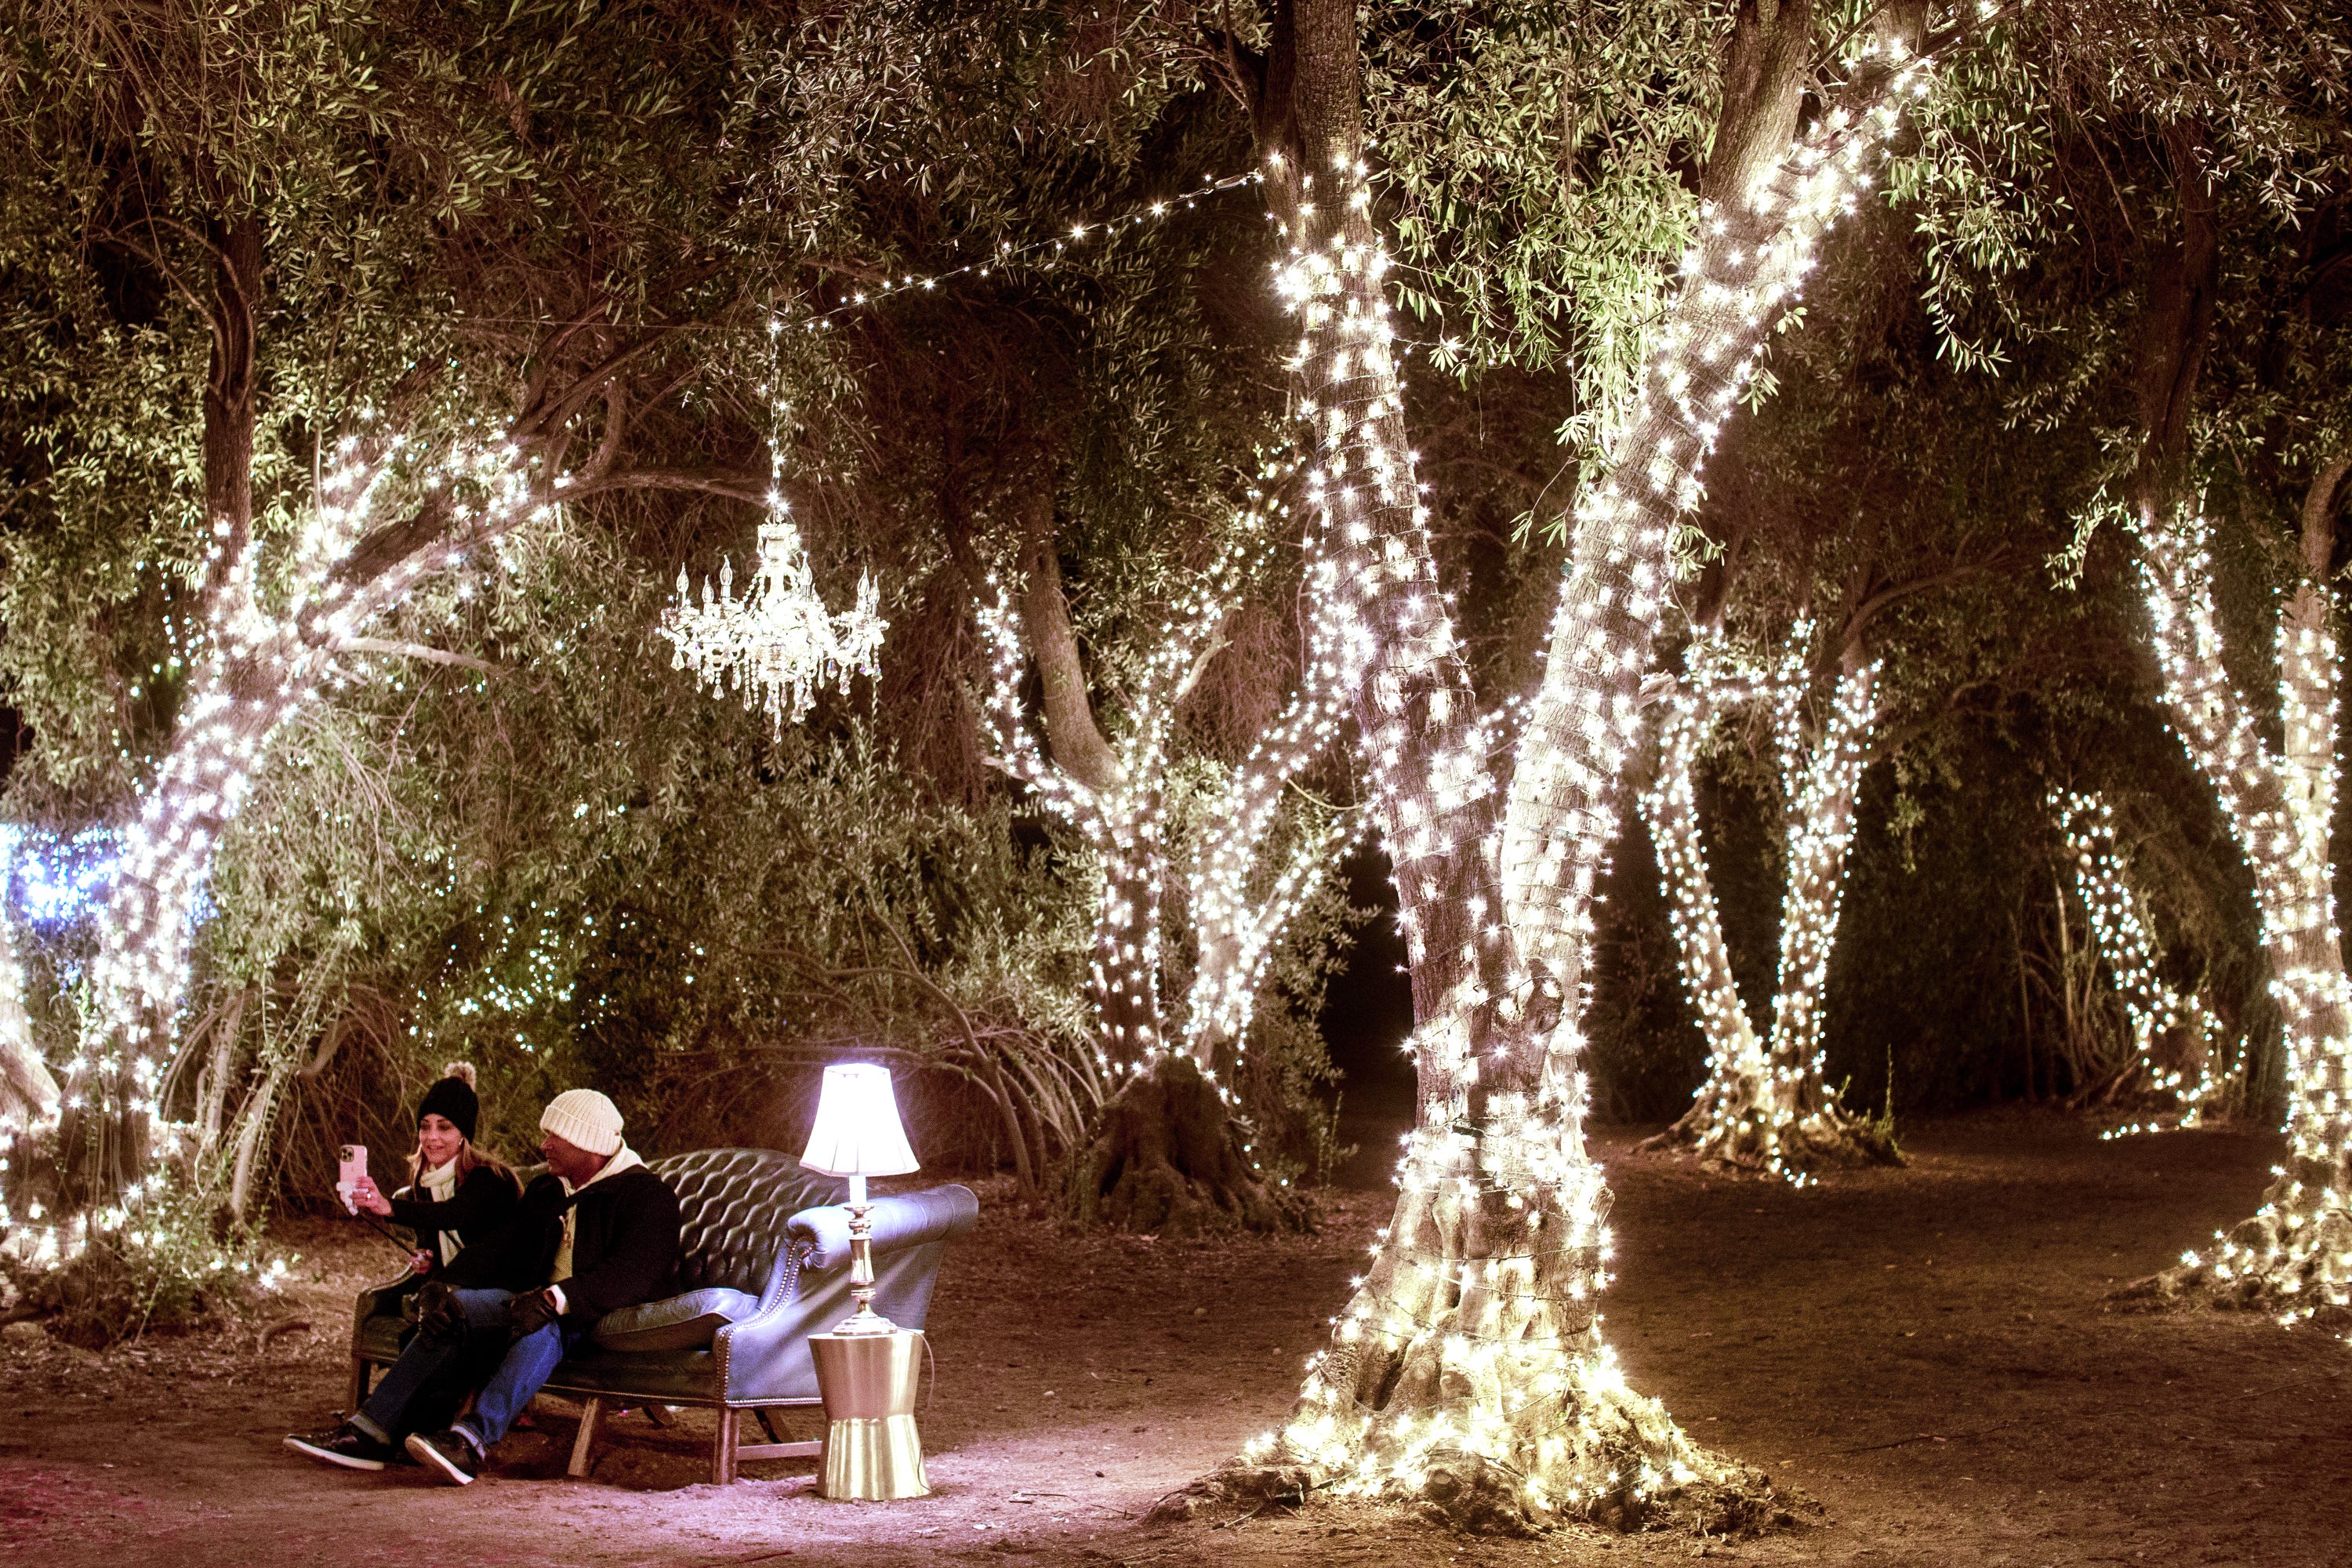 A couple sits amongst the olive trees during the Christmas Nights festival at 123 Farm in Beaumont, Calif., on Monday, Dec. 5, 2022.